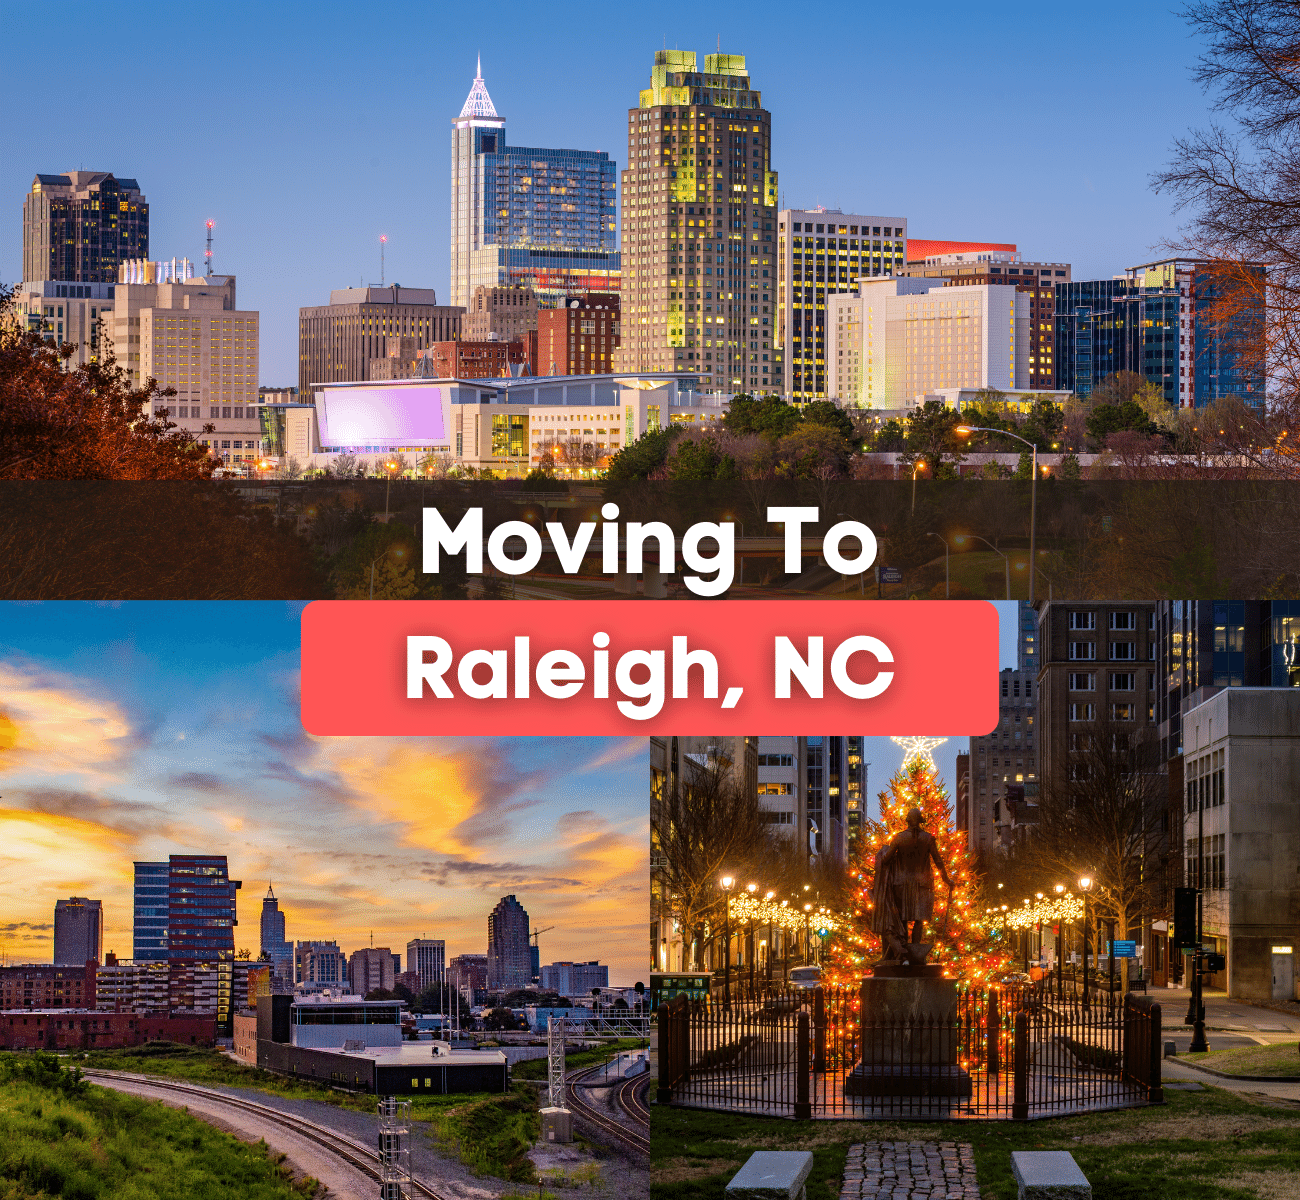 Moving to Raleigh, NC - What is it like living in Raleigh, North Carolina